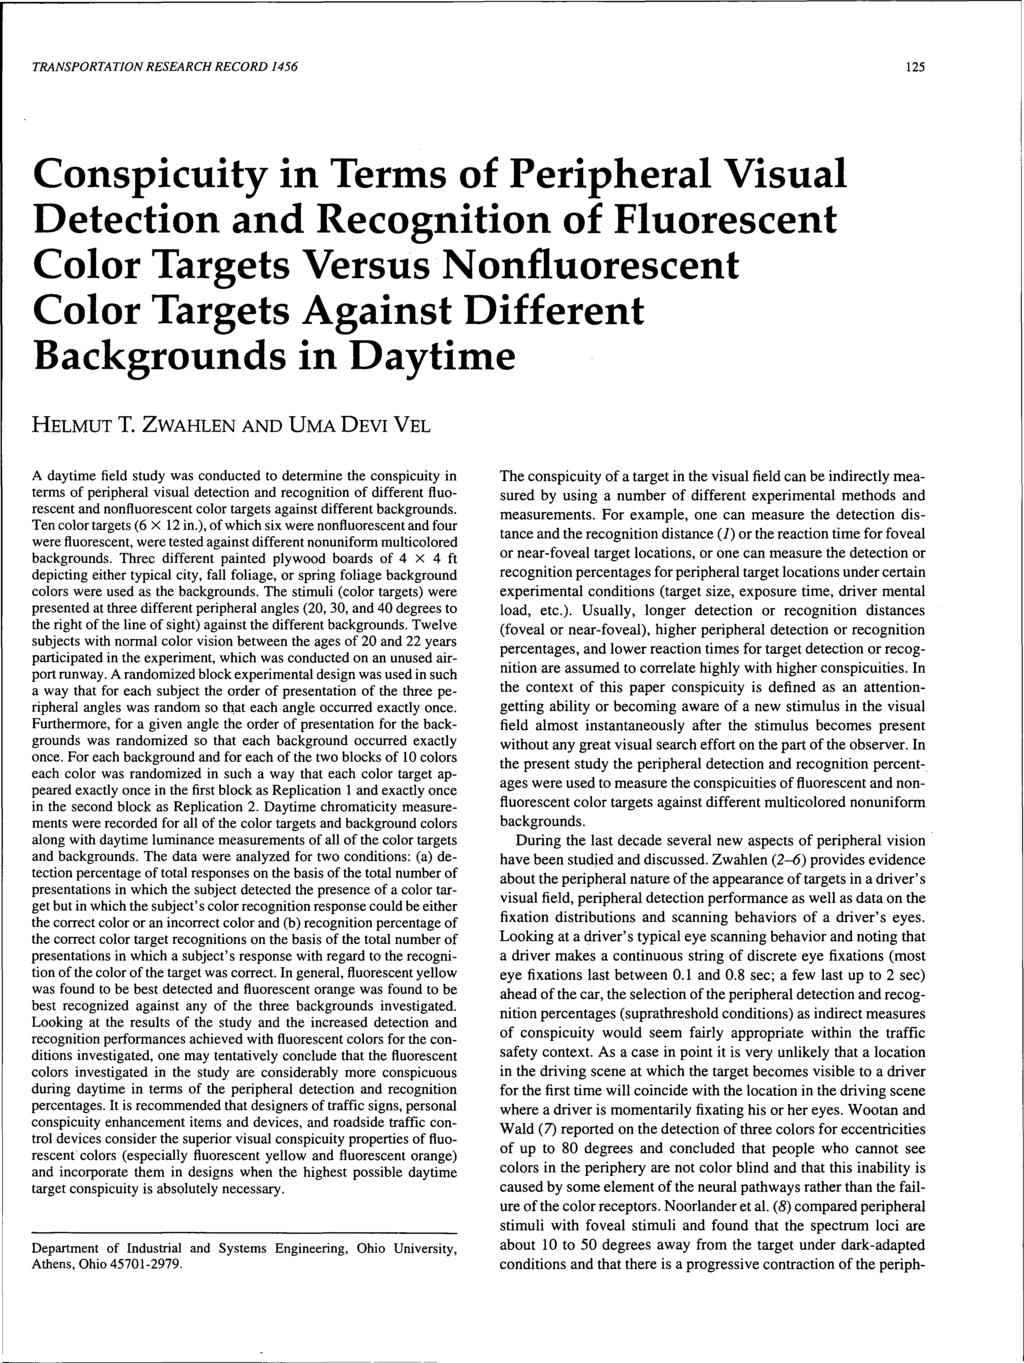 TRANSPORTATION RESEARCH RECORD 1456 125 Conspicity in Terms of Peripheral Visal Detection and Recognition of Florescent Color Targets Verss N onflorescent Color Targets Against Different Backgronds